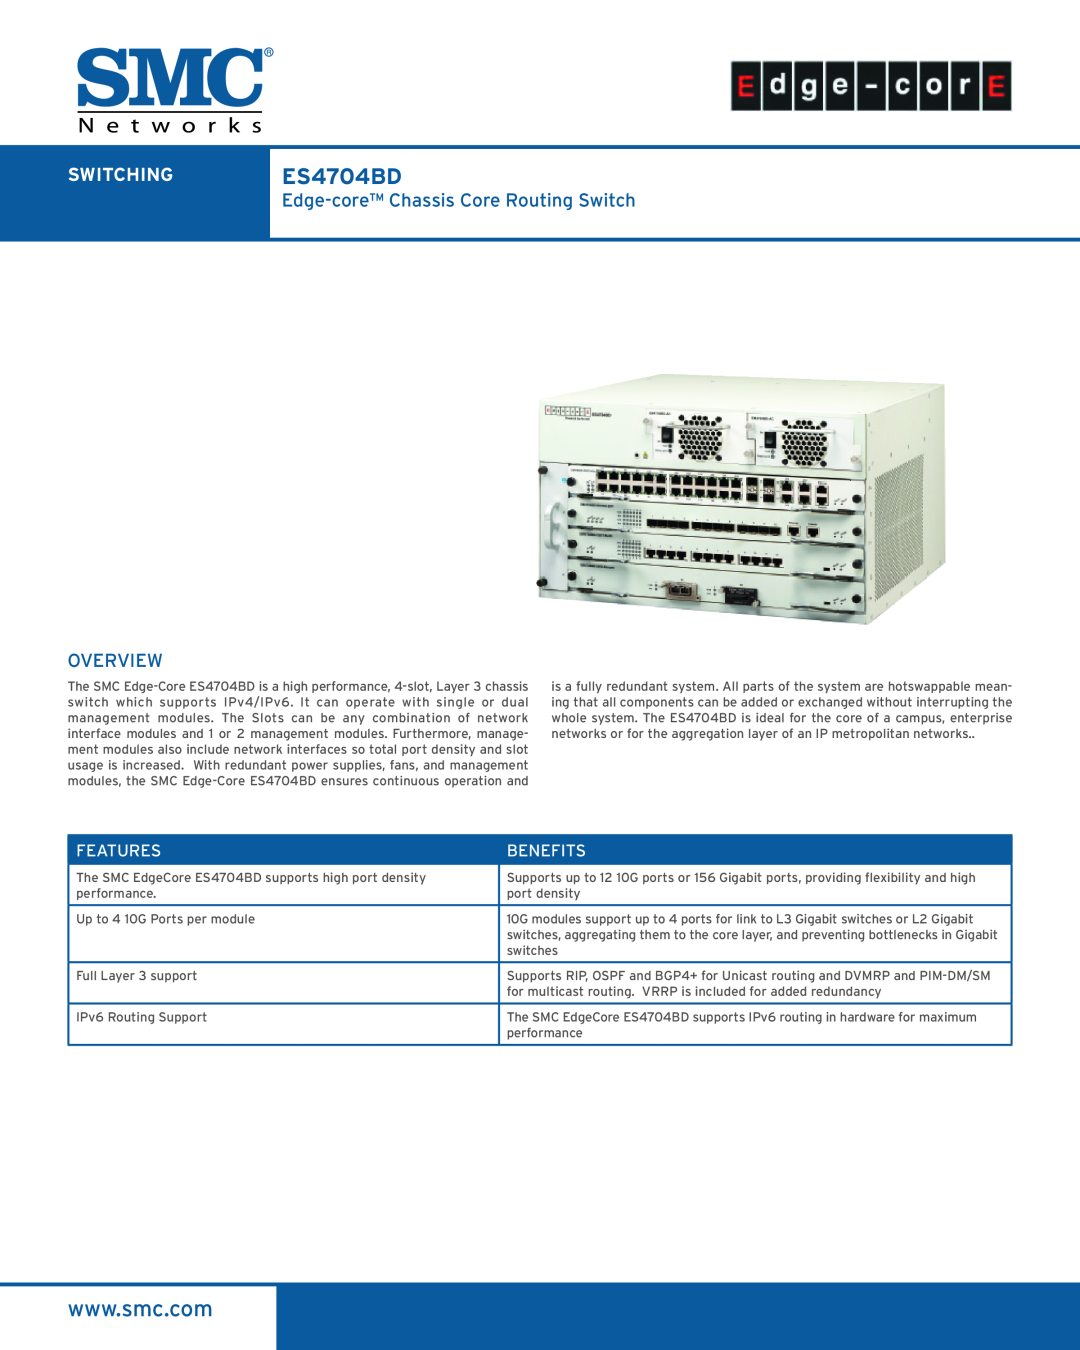 SMC Networks manual SWITCHINGES4704BD, Features, Benefits, Edge-core Chassis Core Routing Switch, Overview 